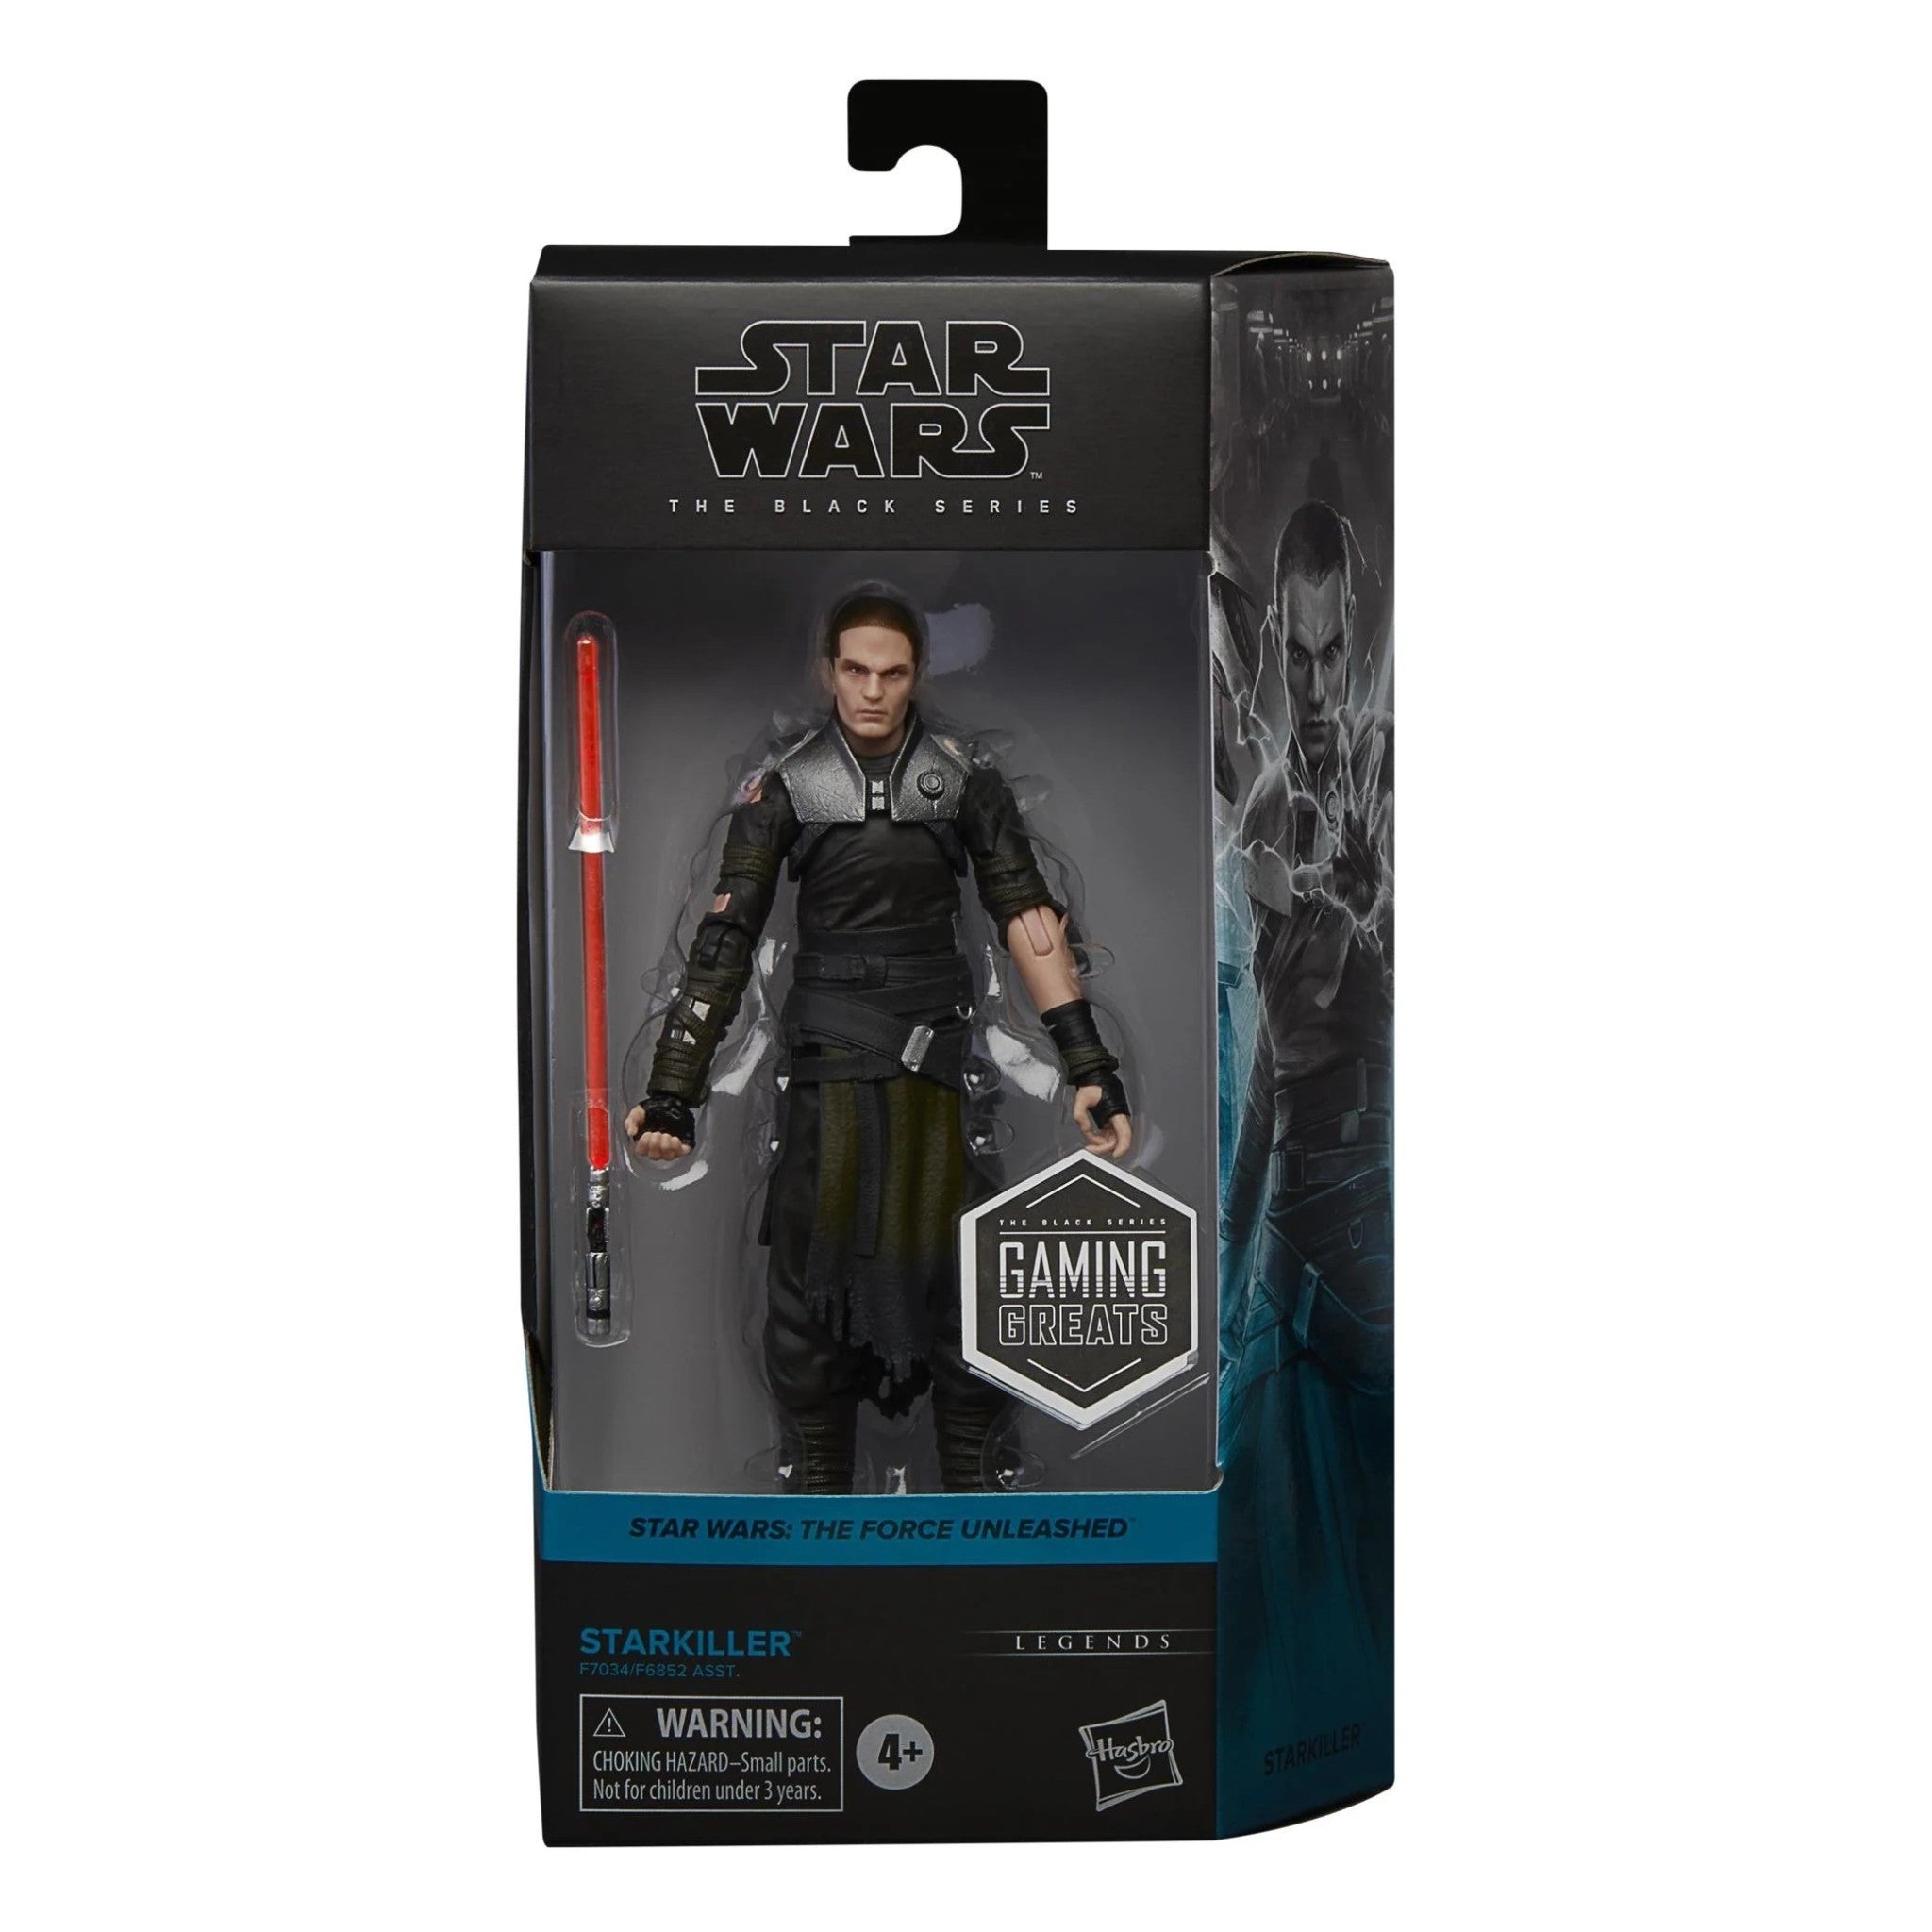 Star Wars Black Series 6" #26 Gaming Greats The Force Unleashed Starkiller